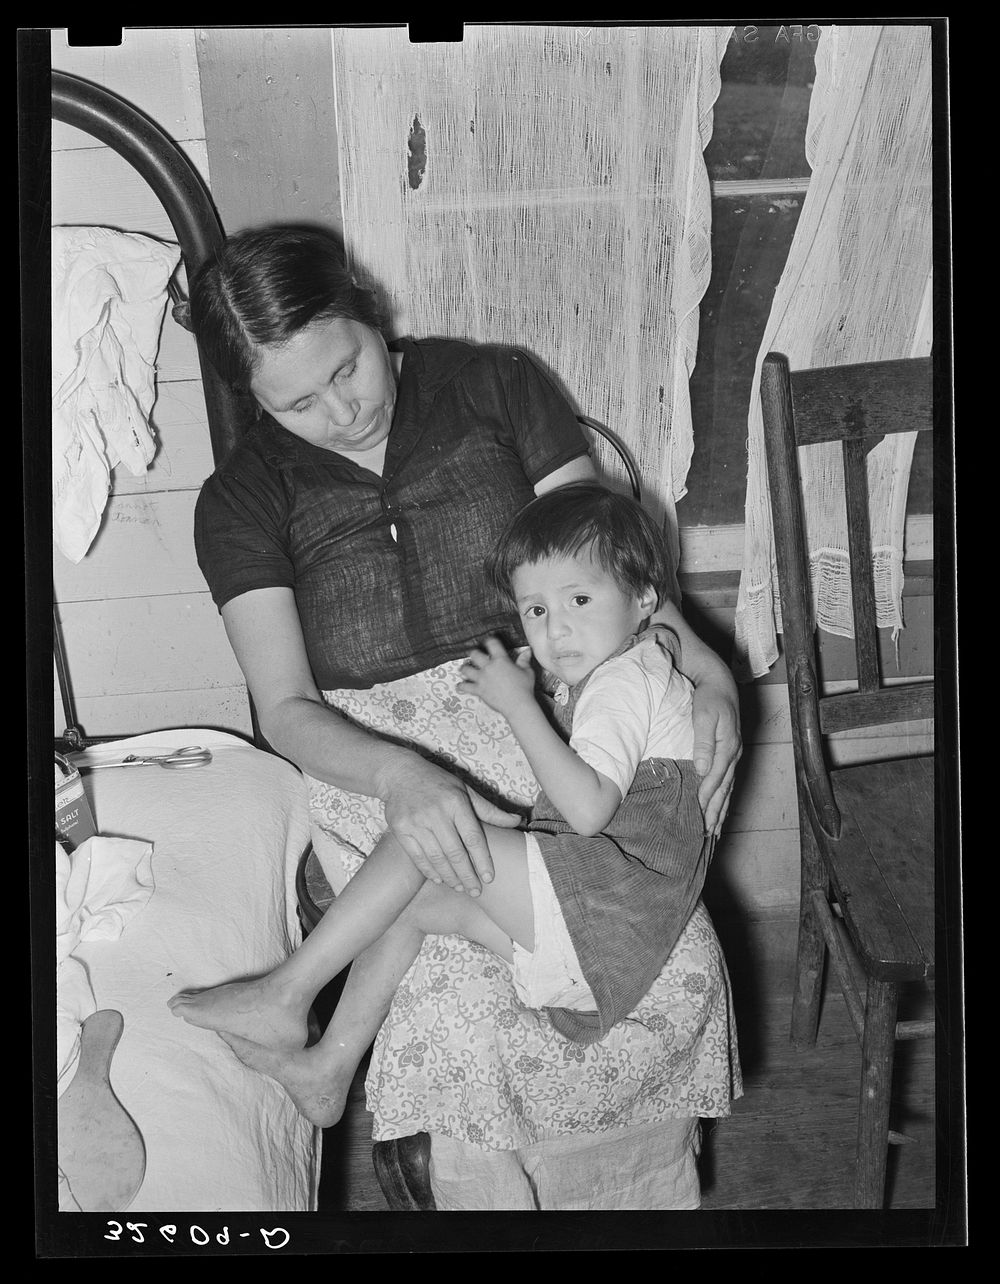 [Untitled photo, possibly related to: Mexican mother and child. San Antonio, Texas] by Russell Lee